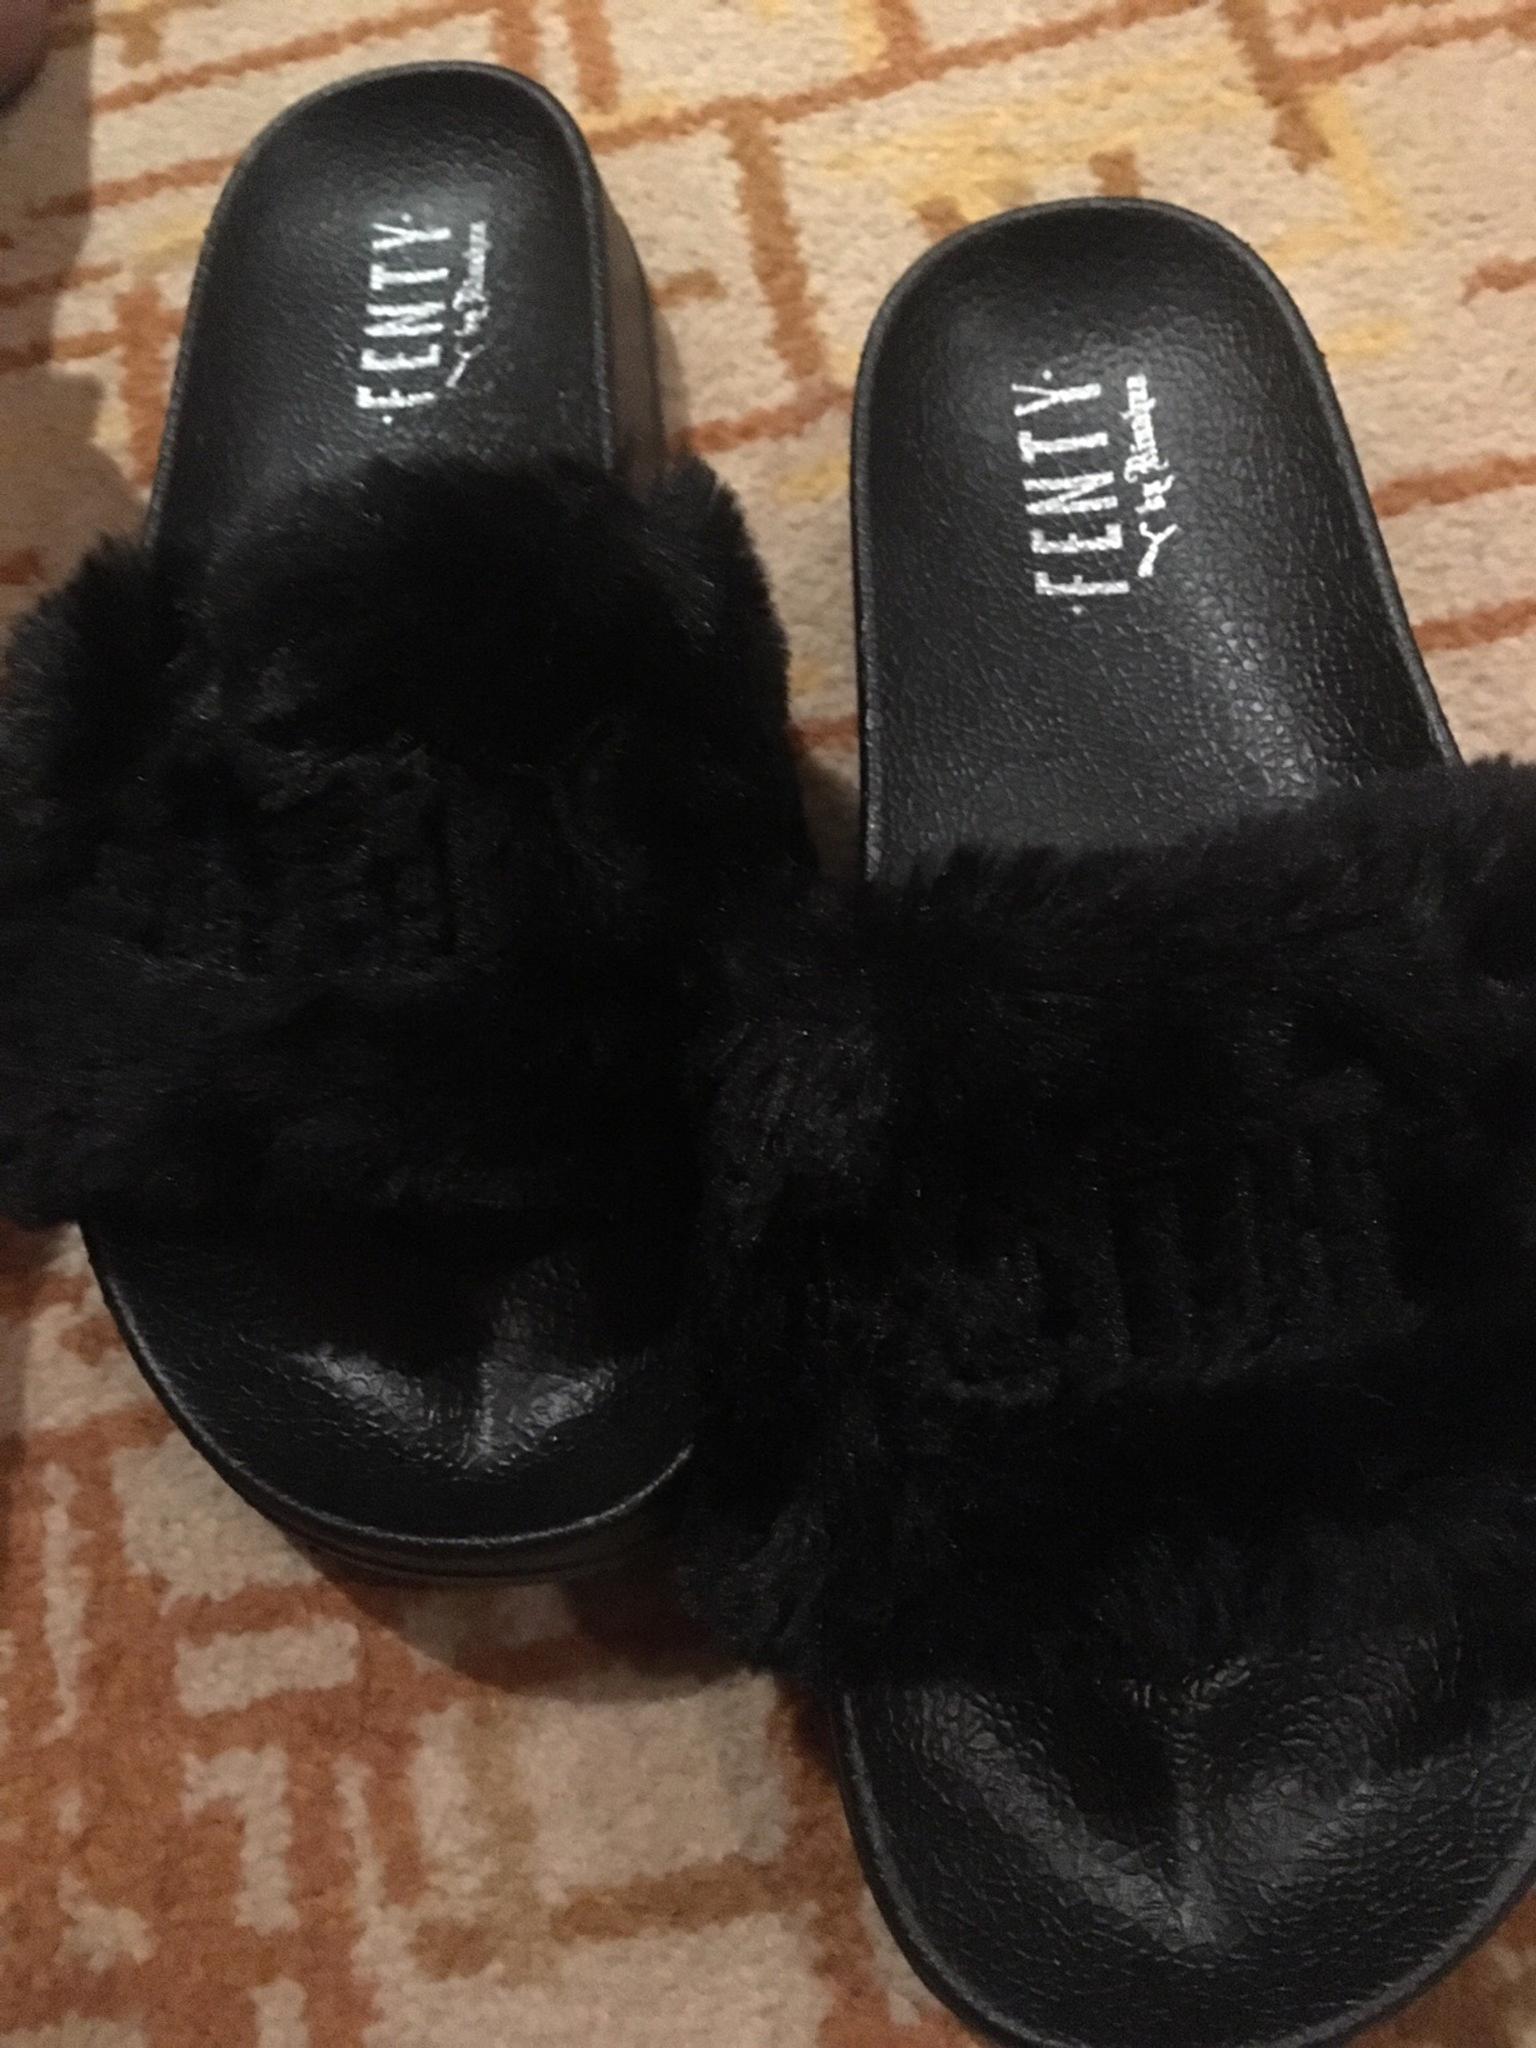 Ciabatte Puma Fenty by Rihanna nuove in 41011 Campogalliano for €35.00 for  sale | Shpock